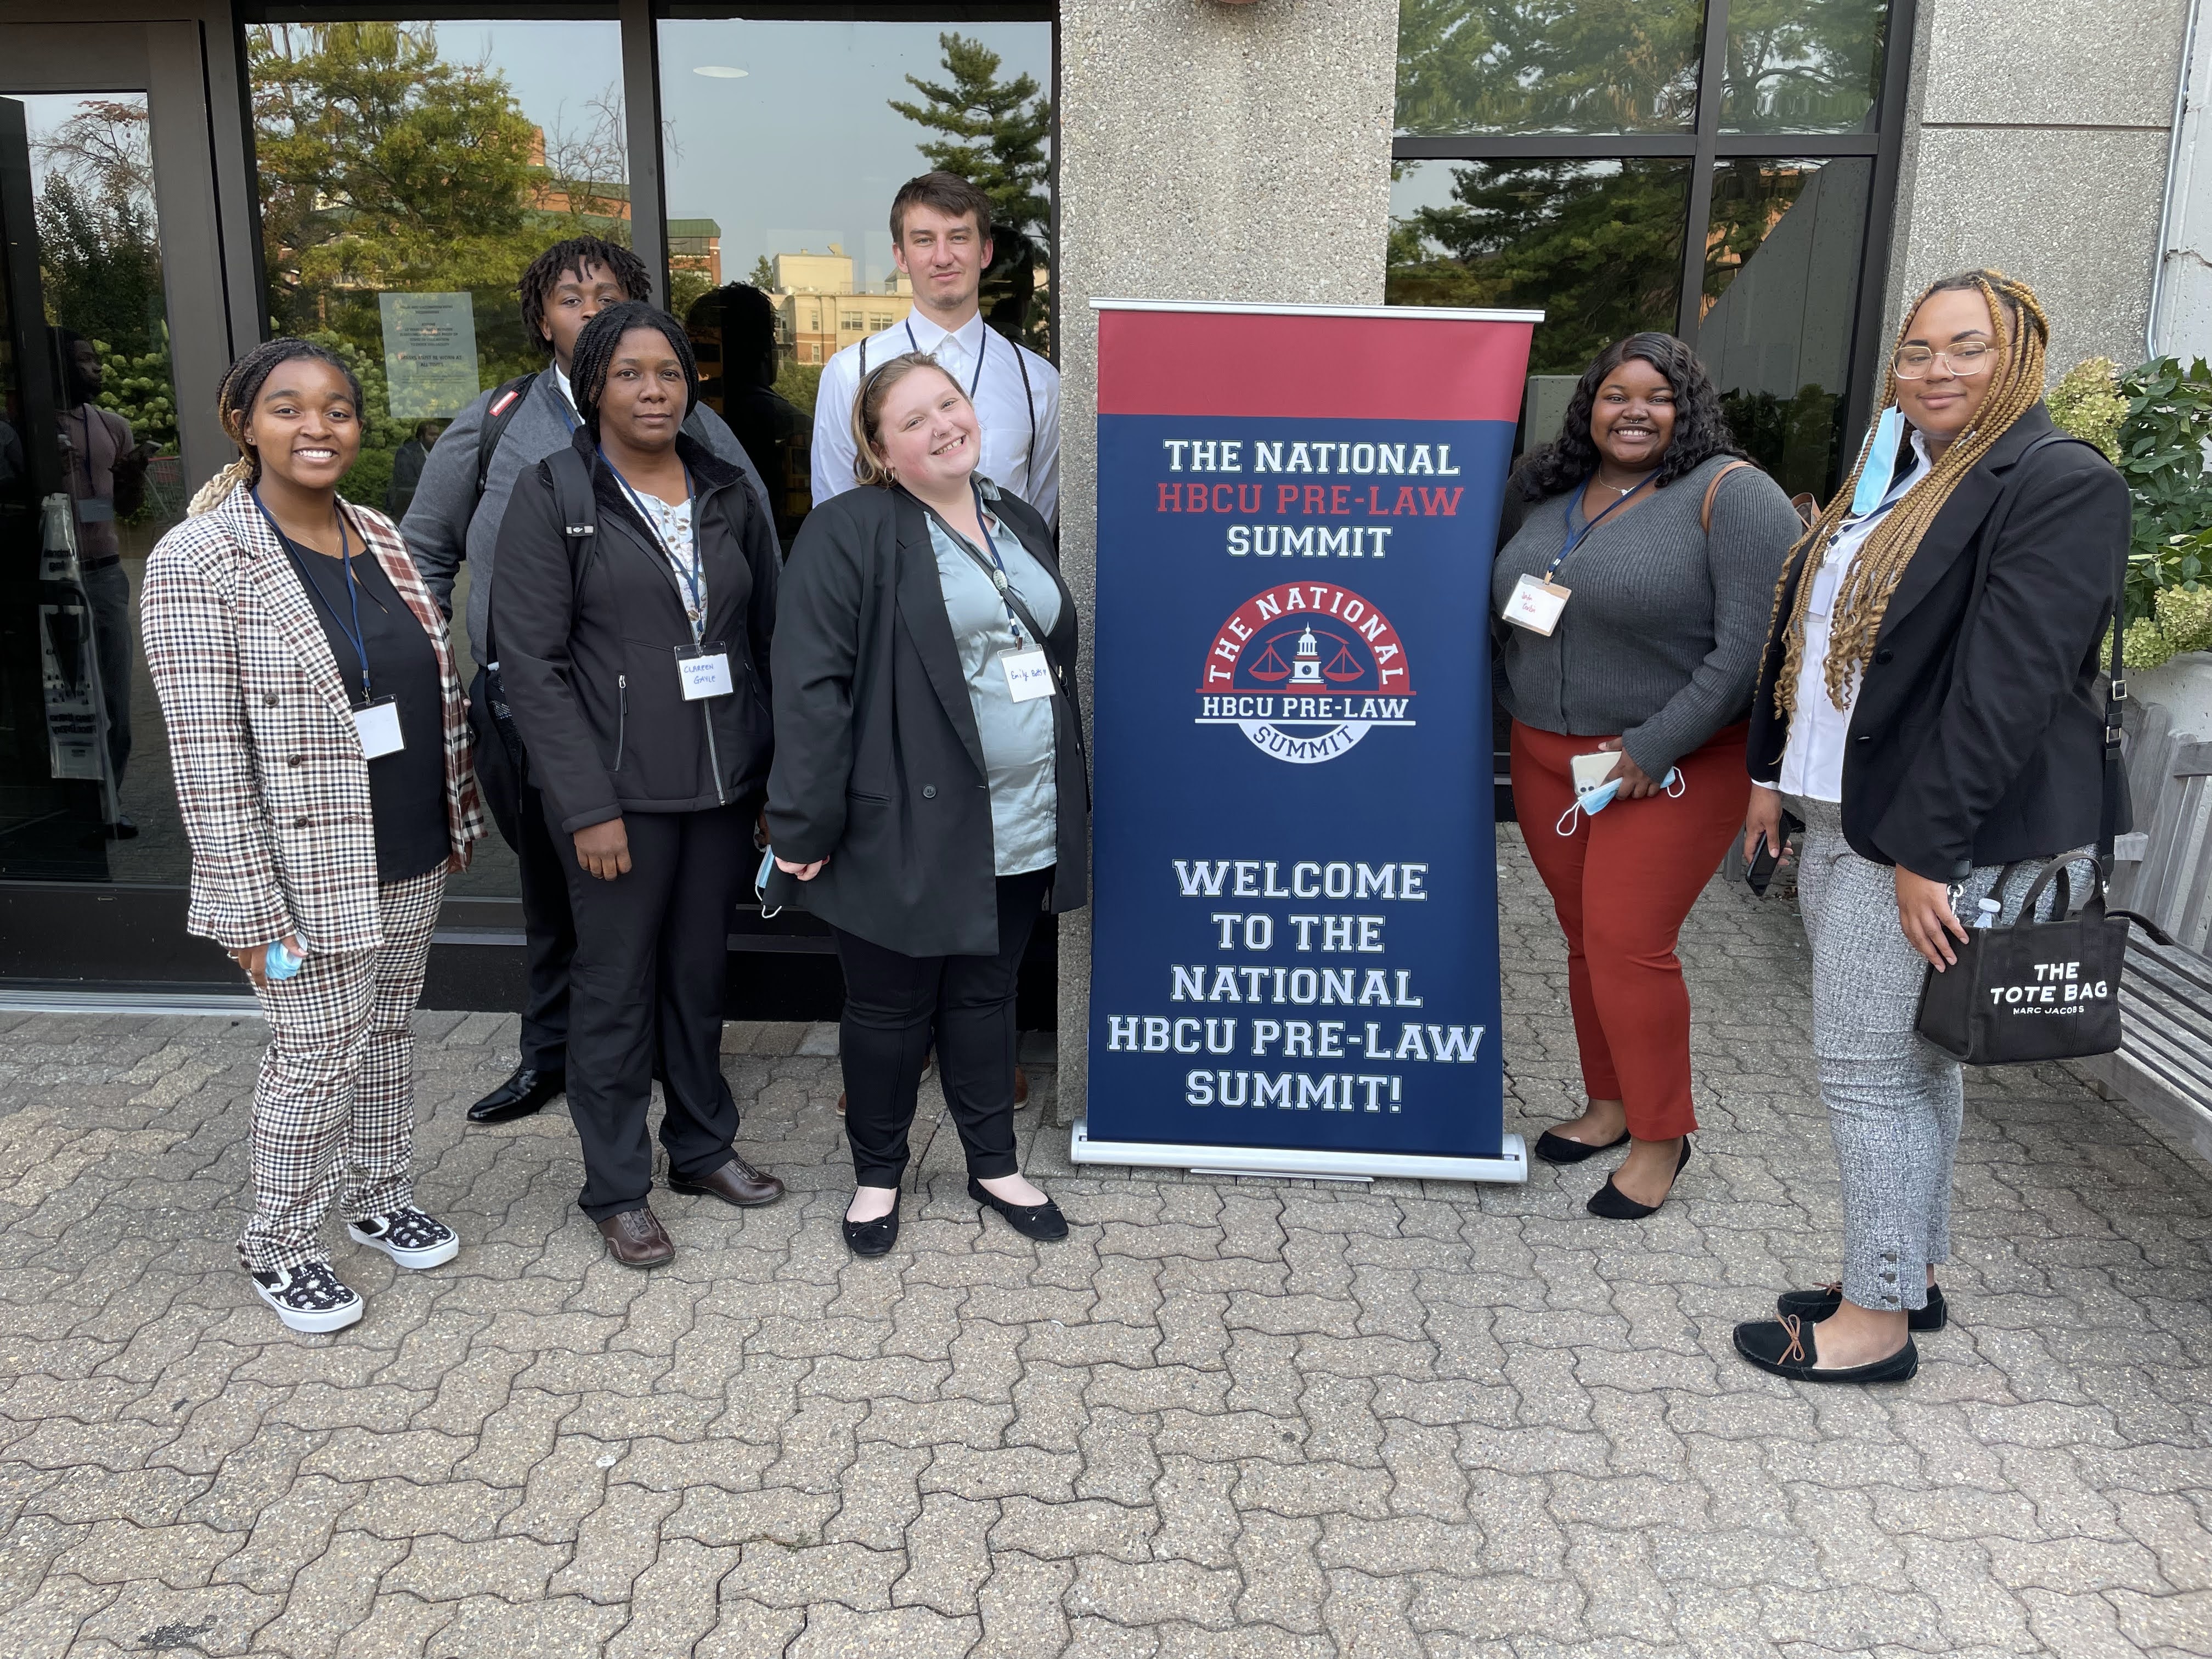 Seven Lincoln University students attended a two-day pre-law summit at the HBCU University of D.C. campus